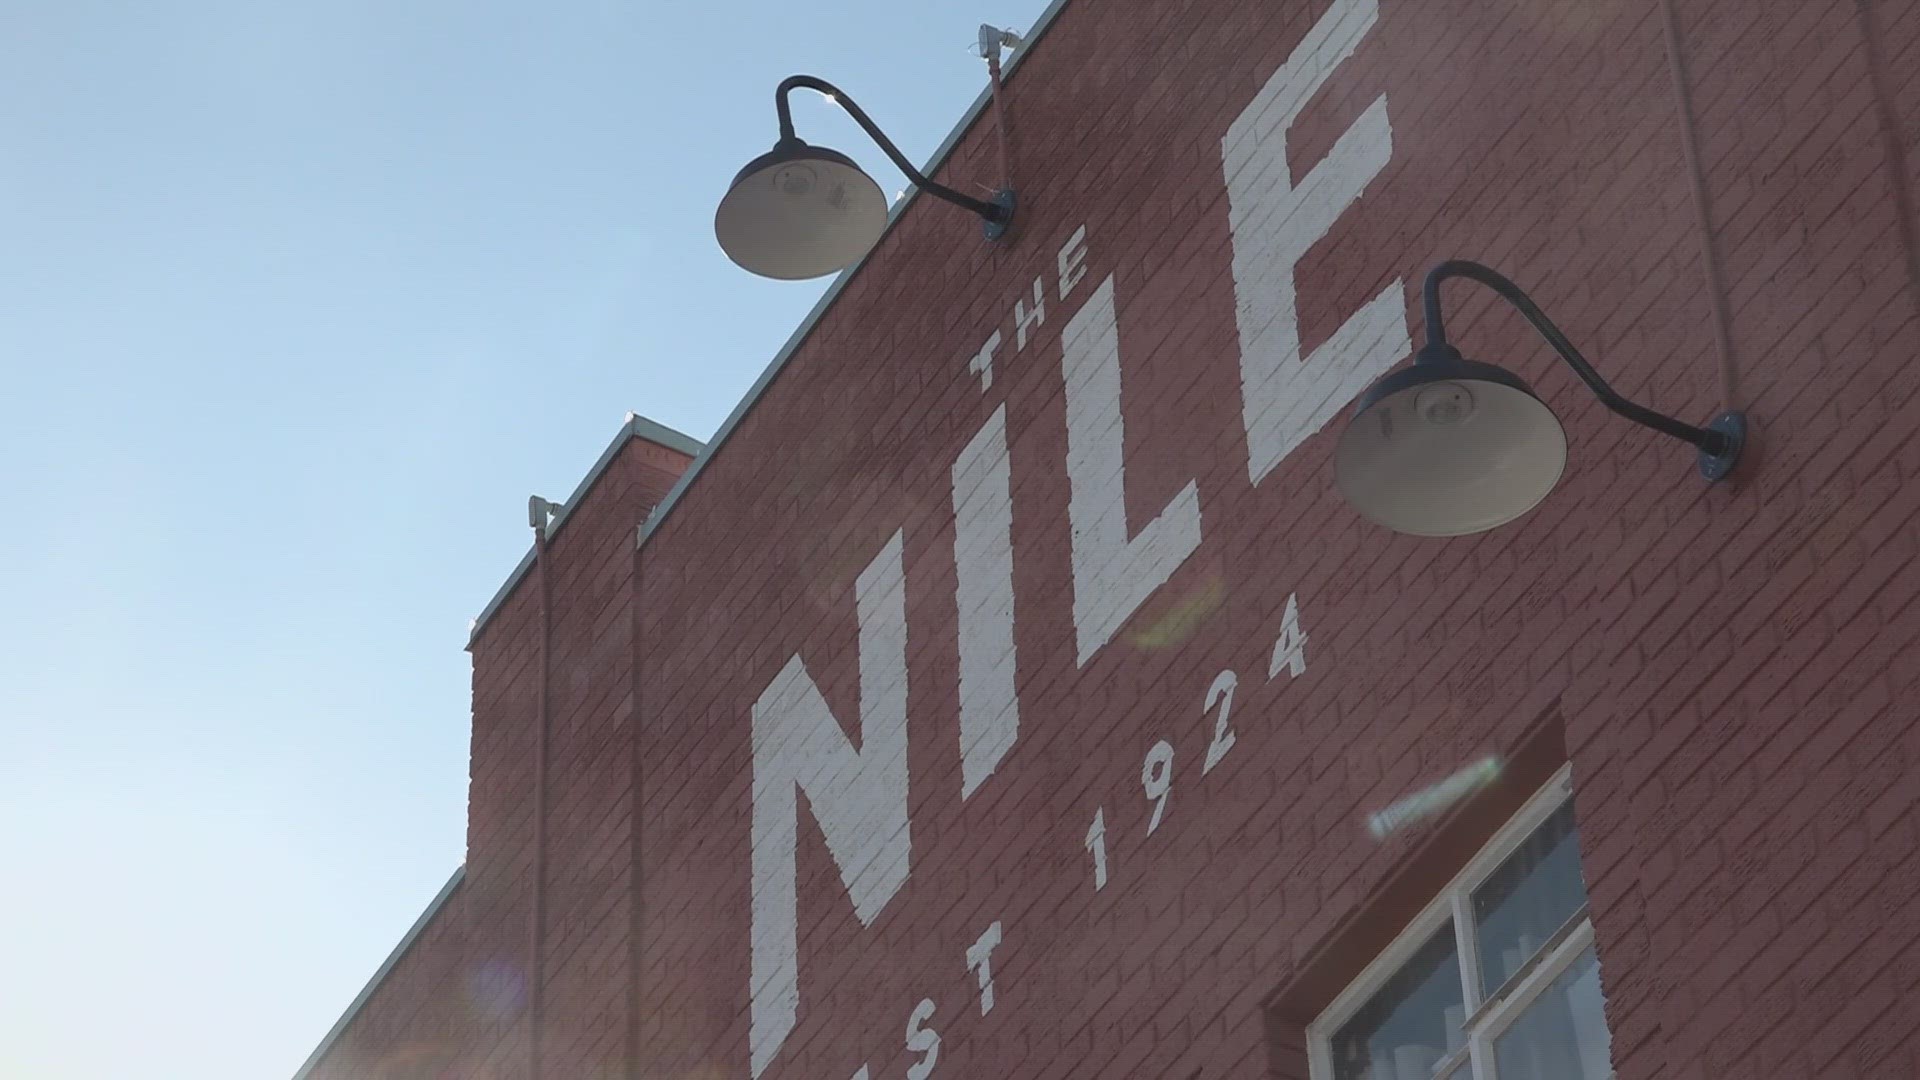 The Nile Theater in Mesa is a hidden treasure of state and entertainment history. Here's a little more on the venue and coffee shop.